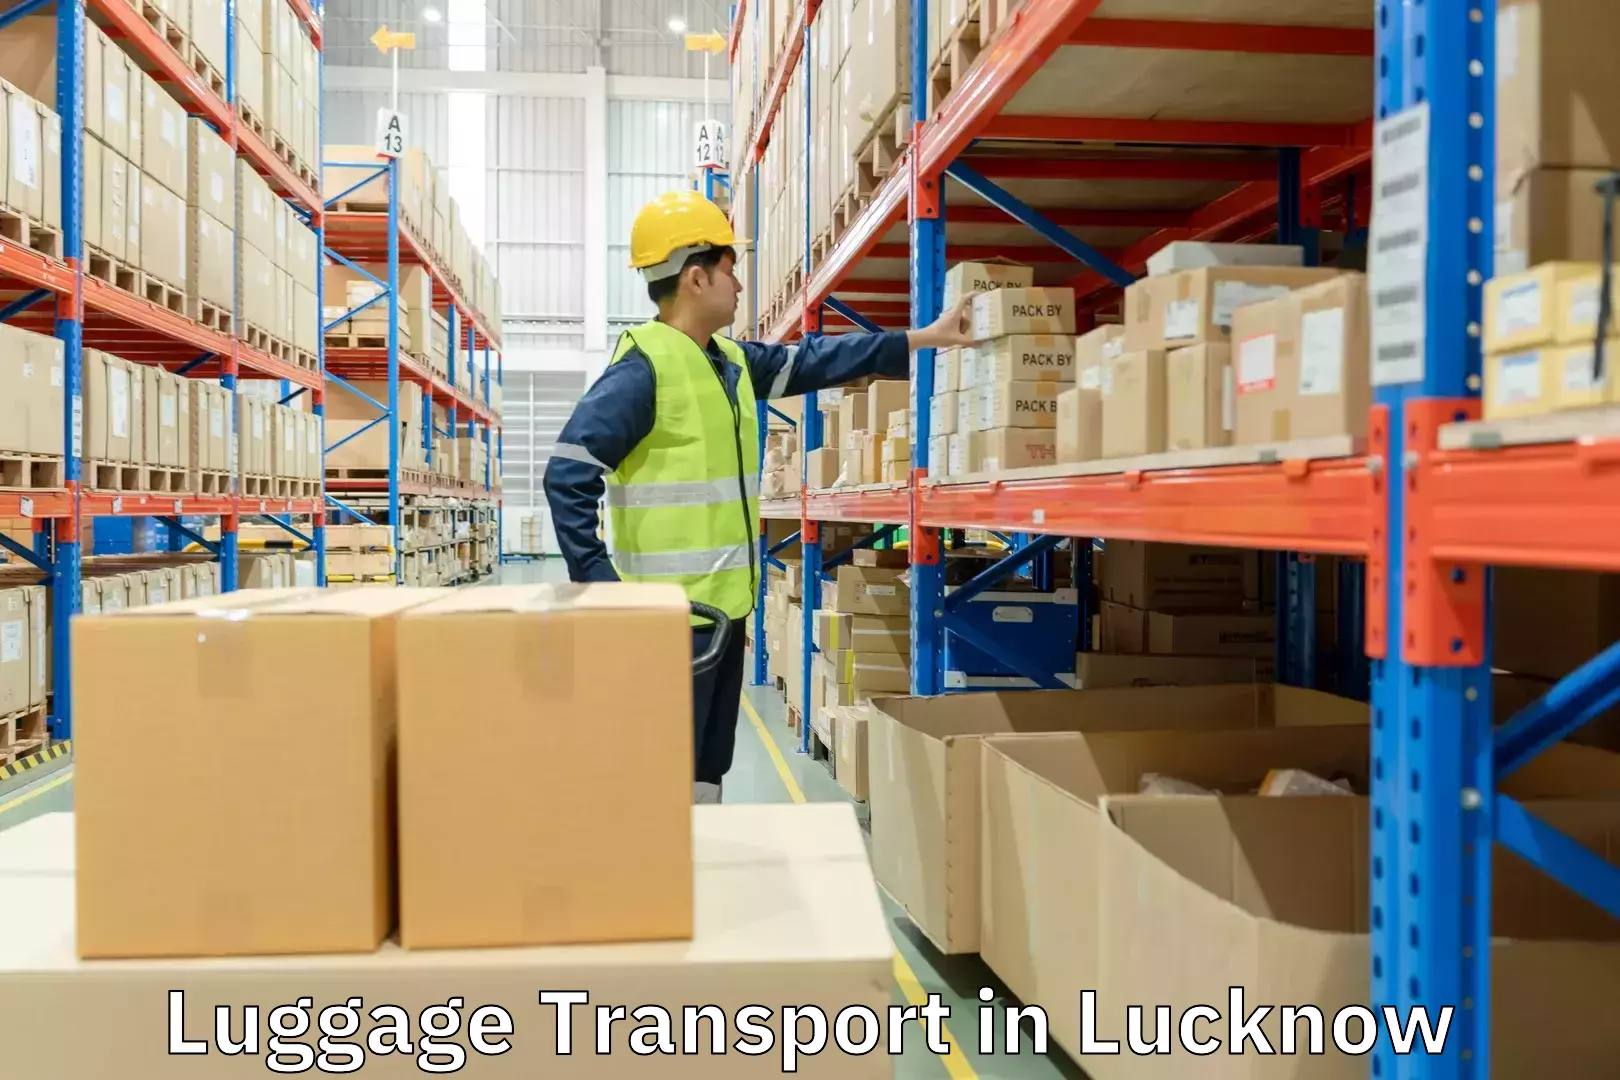 Express baggage shipping in Lucknow